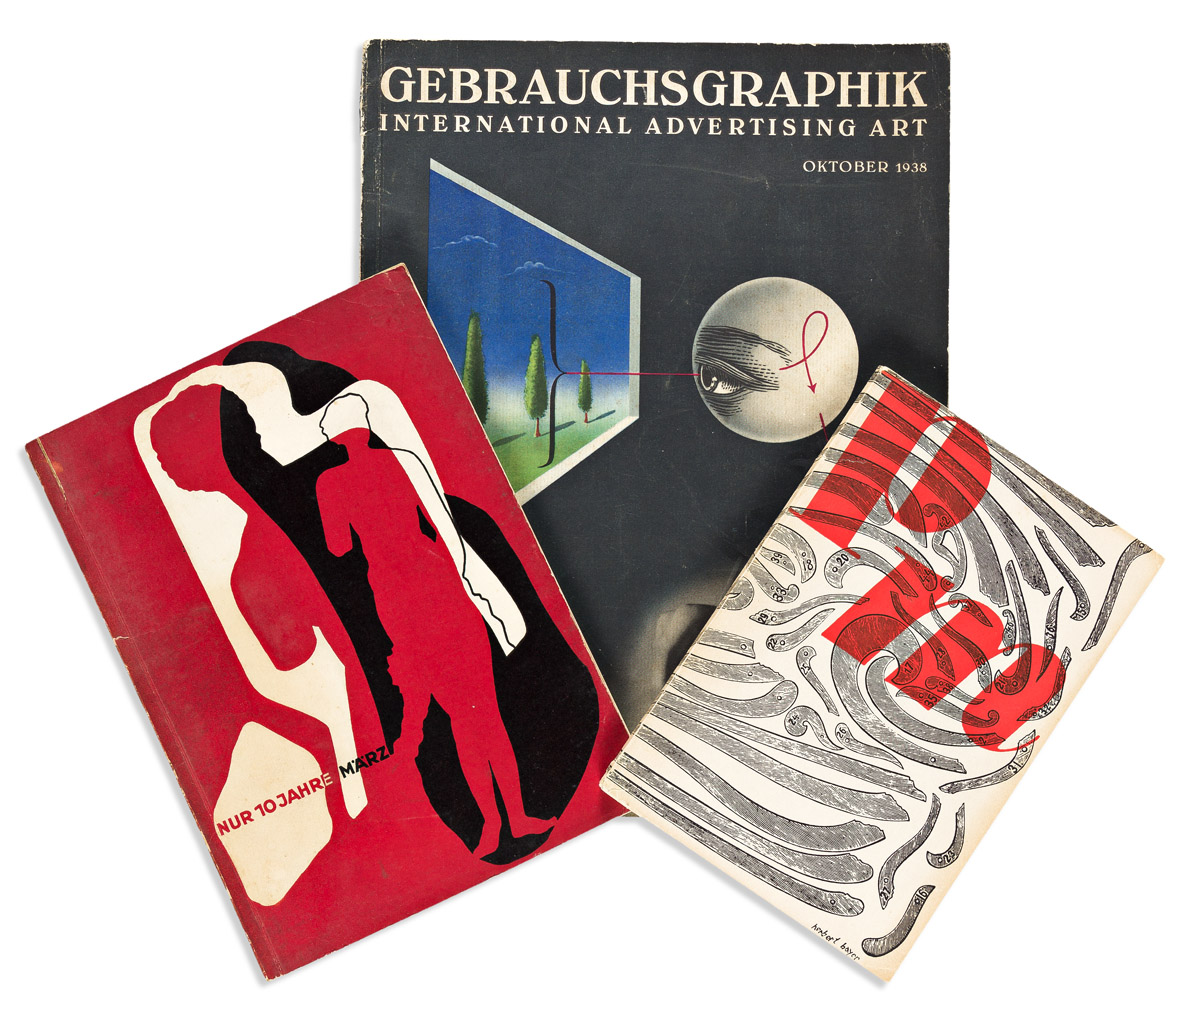 HERBERT BAYER (1900-1985).  [BAYER DESIGNS]. Group of 7 books and catalogues. 1930s. Sizes vary.